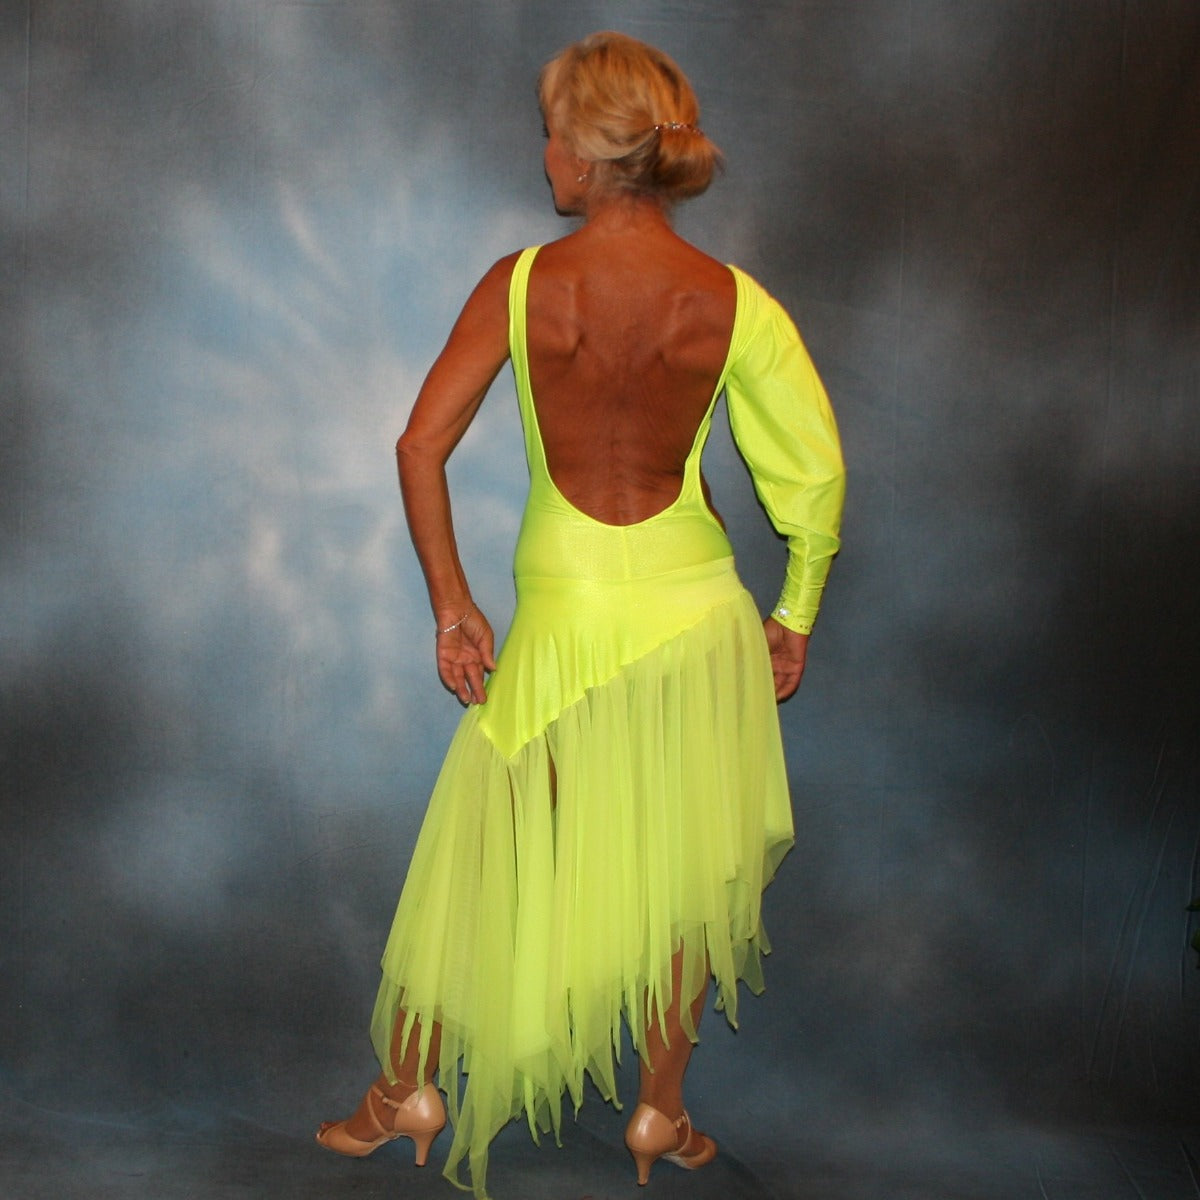 Crystal's Creations back view of florescent yellow theatrical ballroom show dance dress